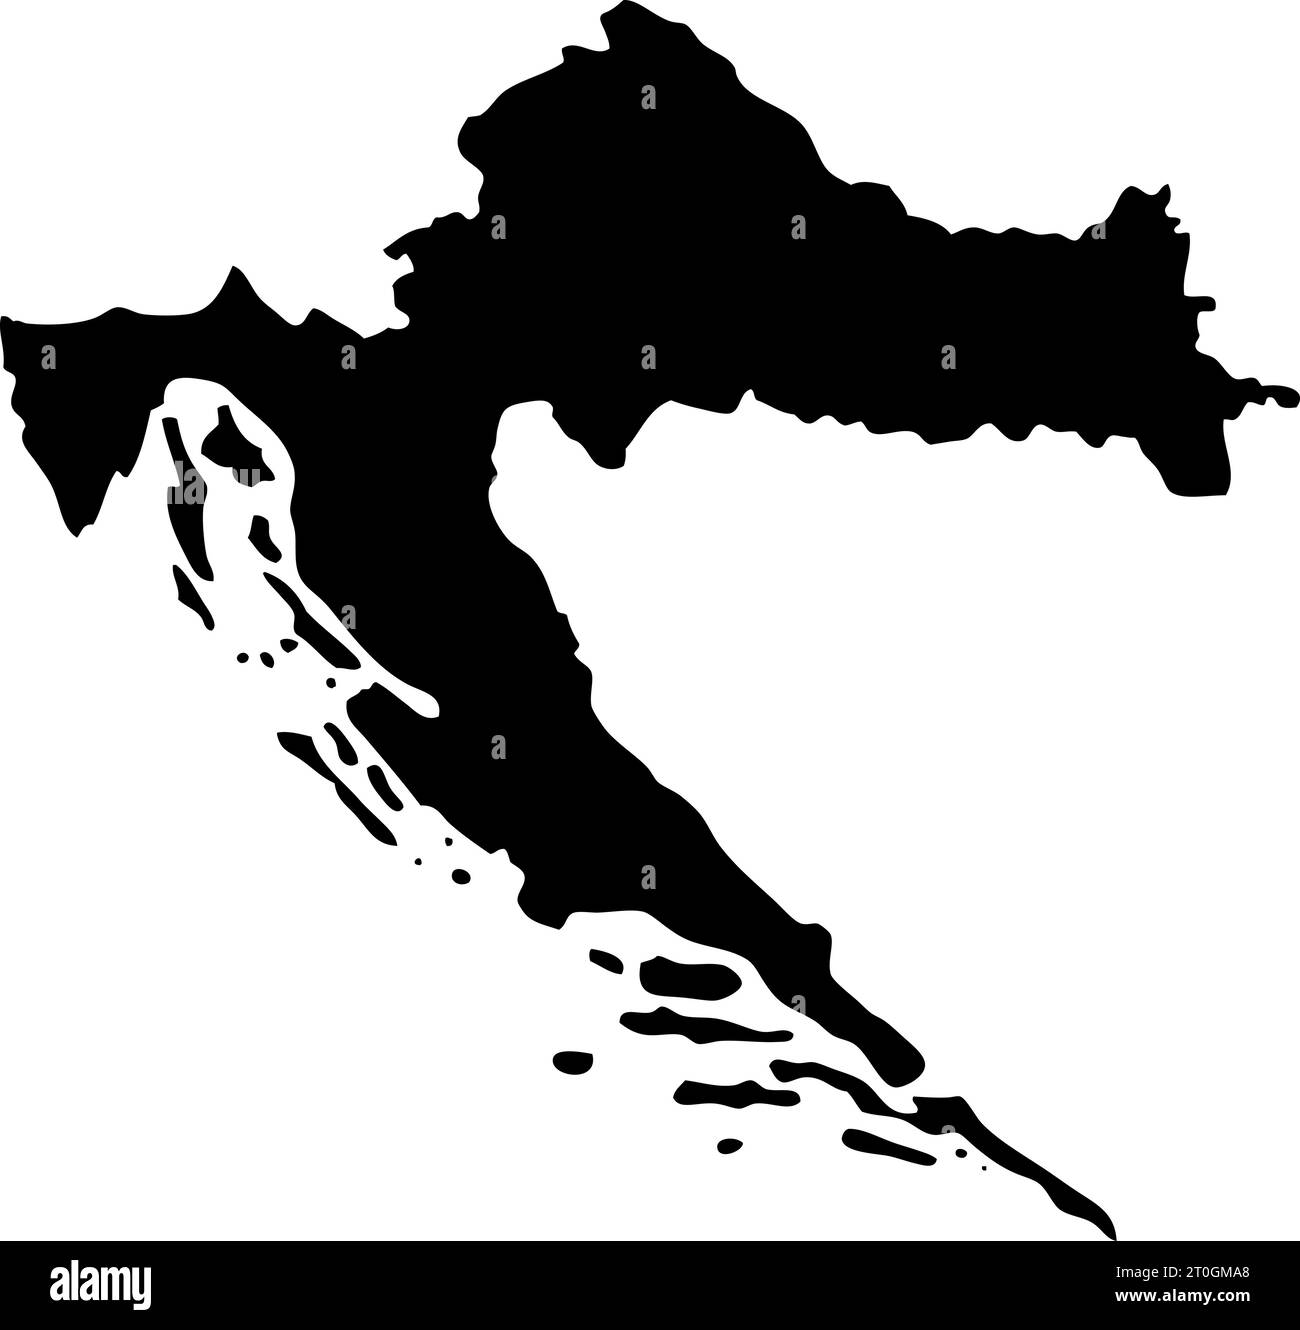 Croatia Vector Map Illustration with Islands (Black and White) Stock Vector